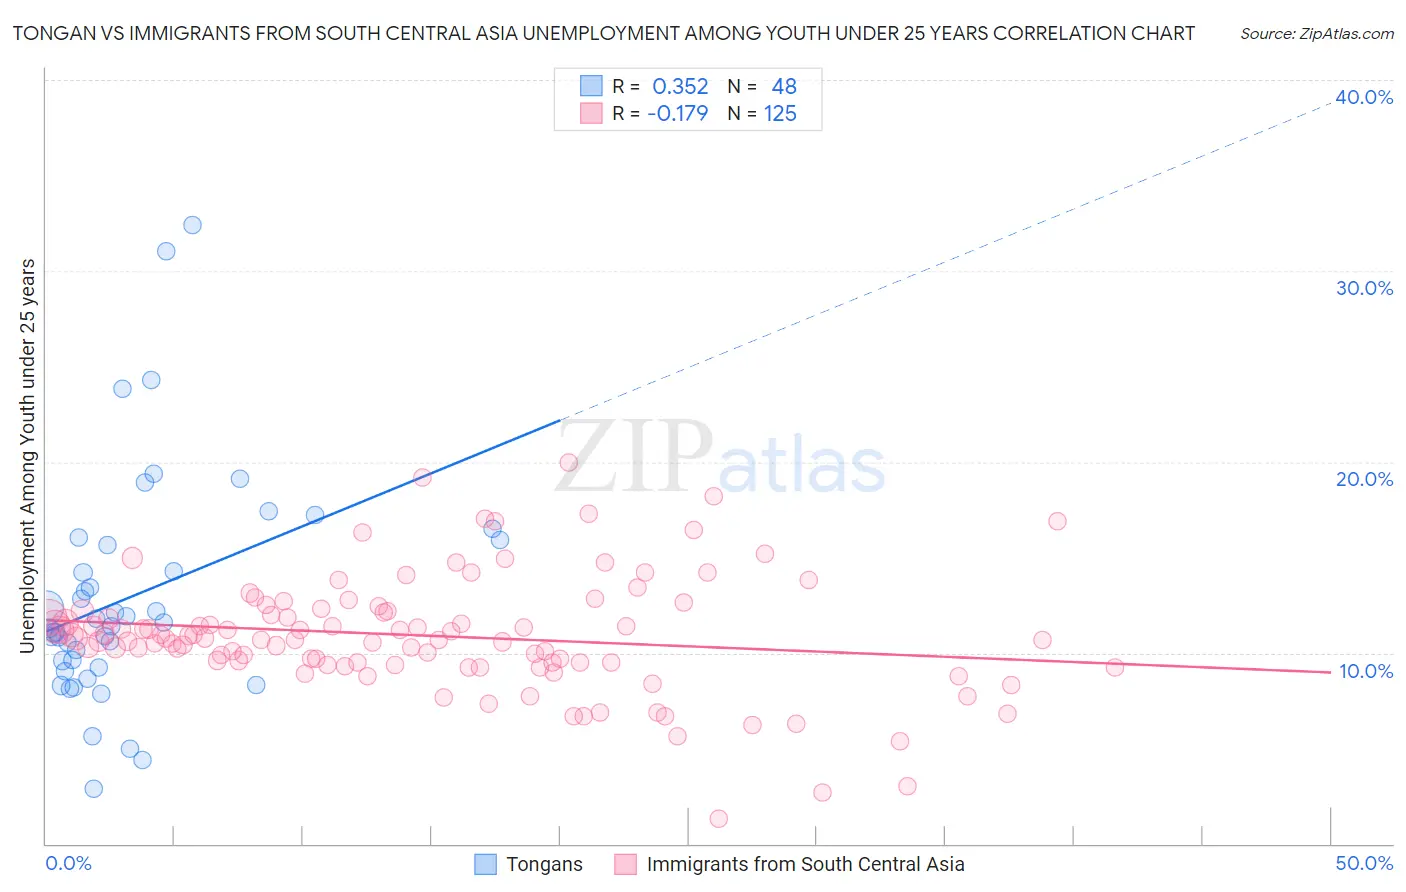 Tongan vs Immigrants from South Central Asia Unemployment Among Youth under 25 years